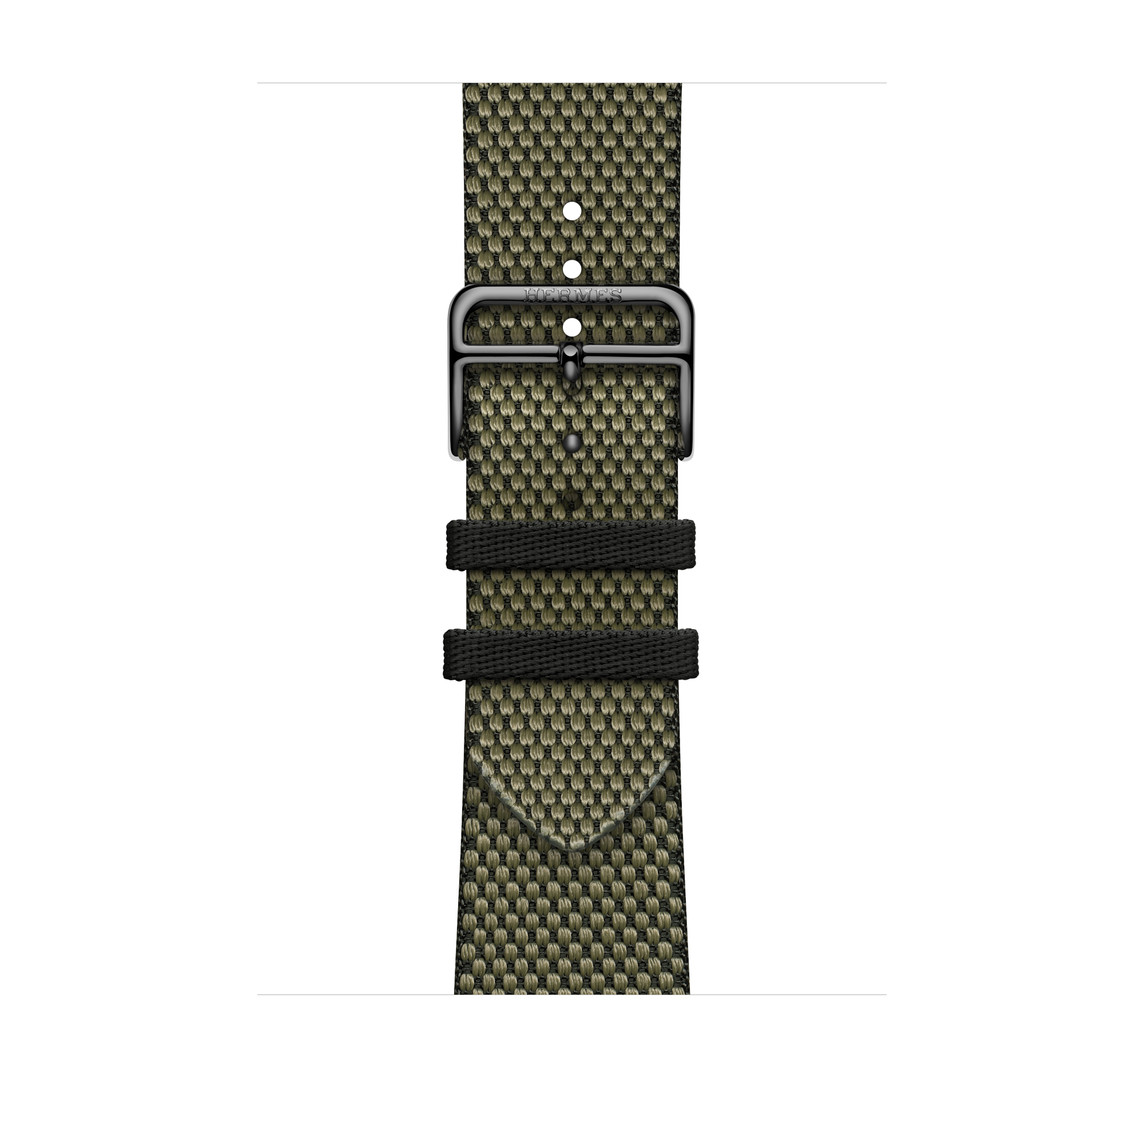 Vert (green) and Noir (black) Toile H Single Tour strap, showing Apple Watch face and digital crown.